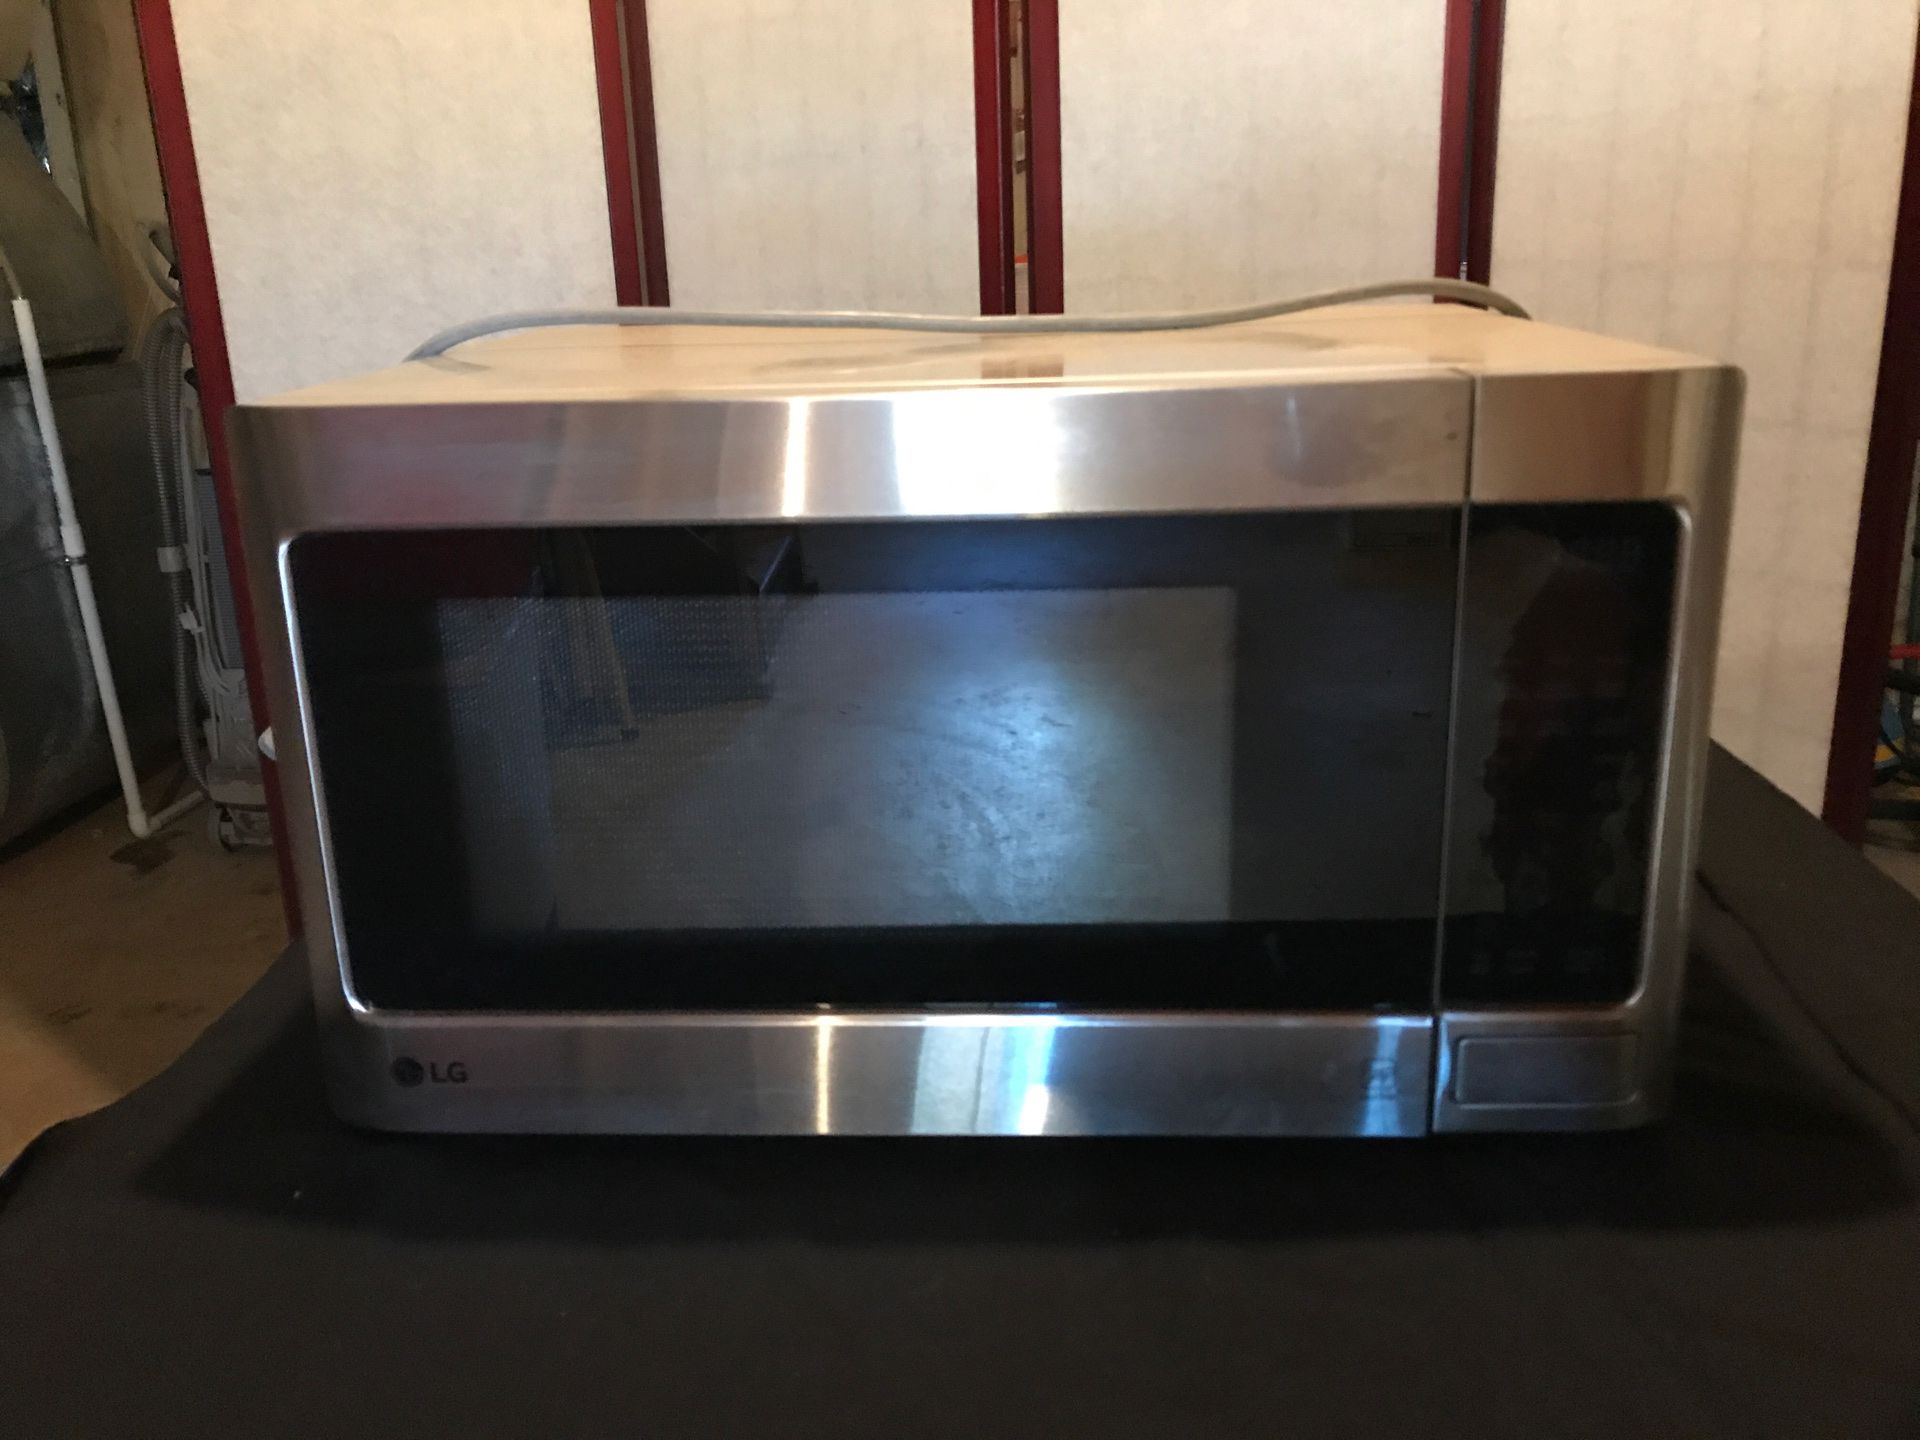 LG 1.5 cu. ft. Microwave oven